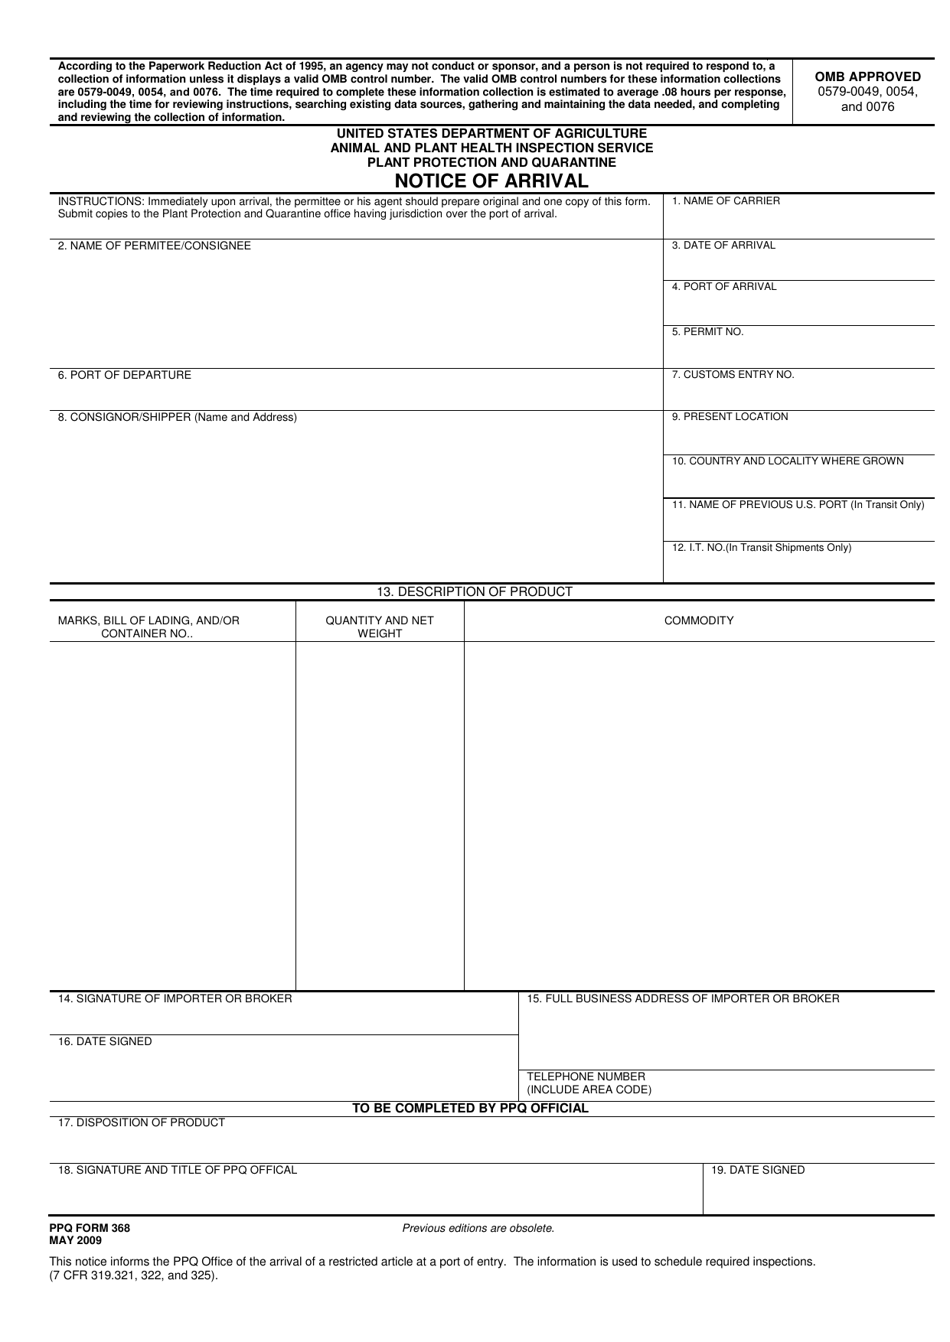 PPQ Form 368 Notice of Arrival, Page 1